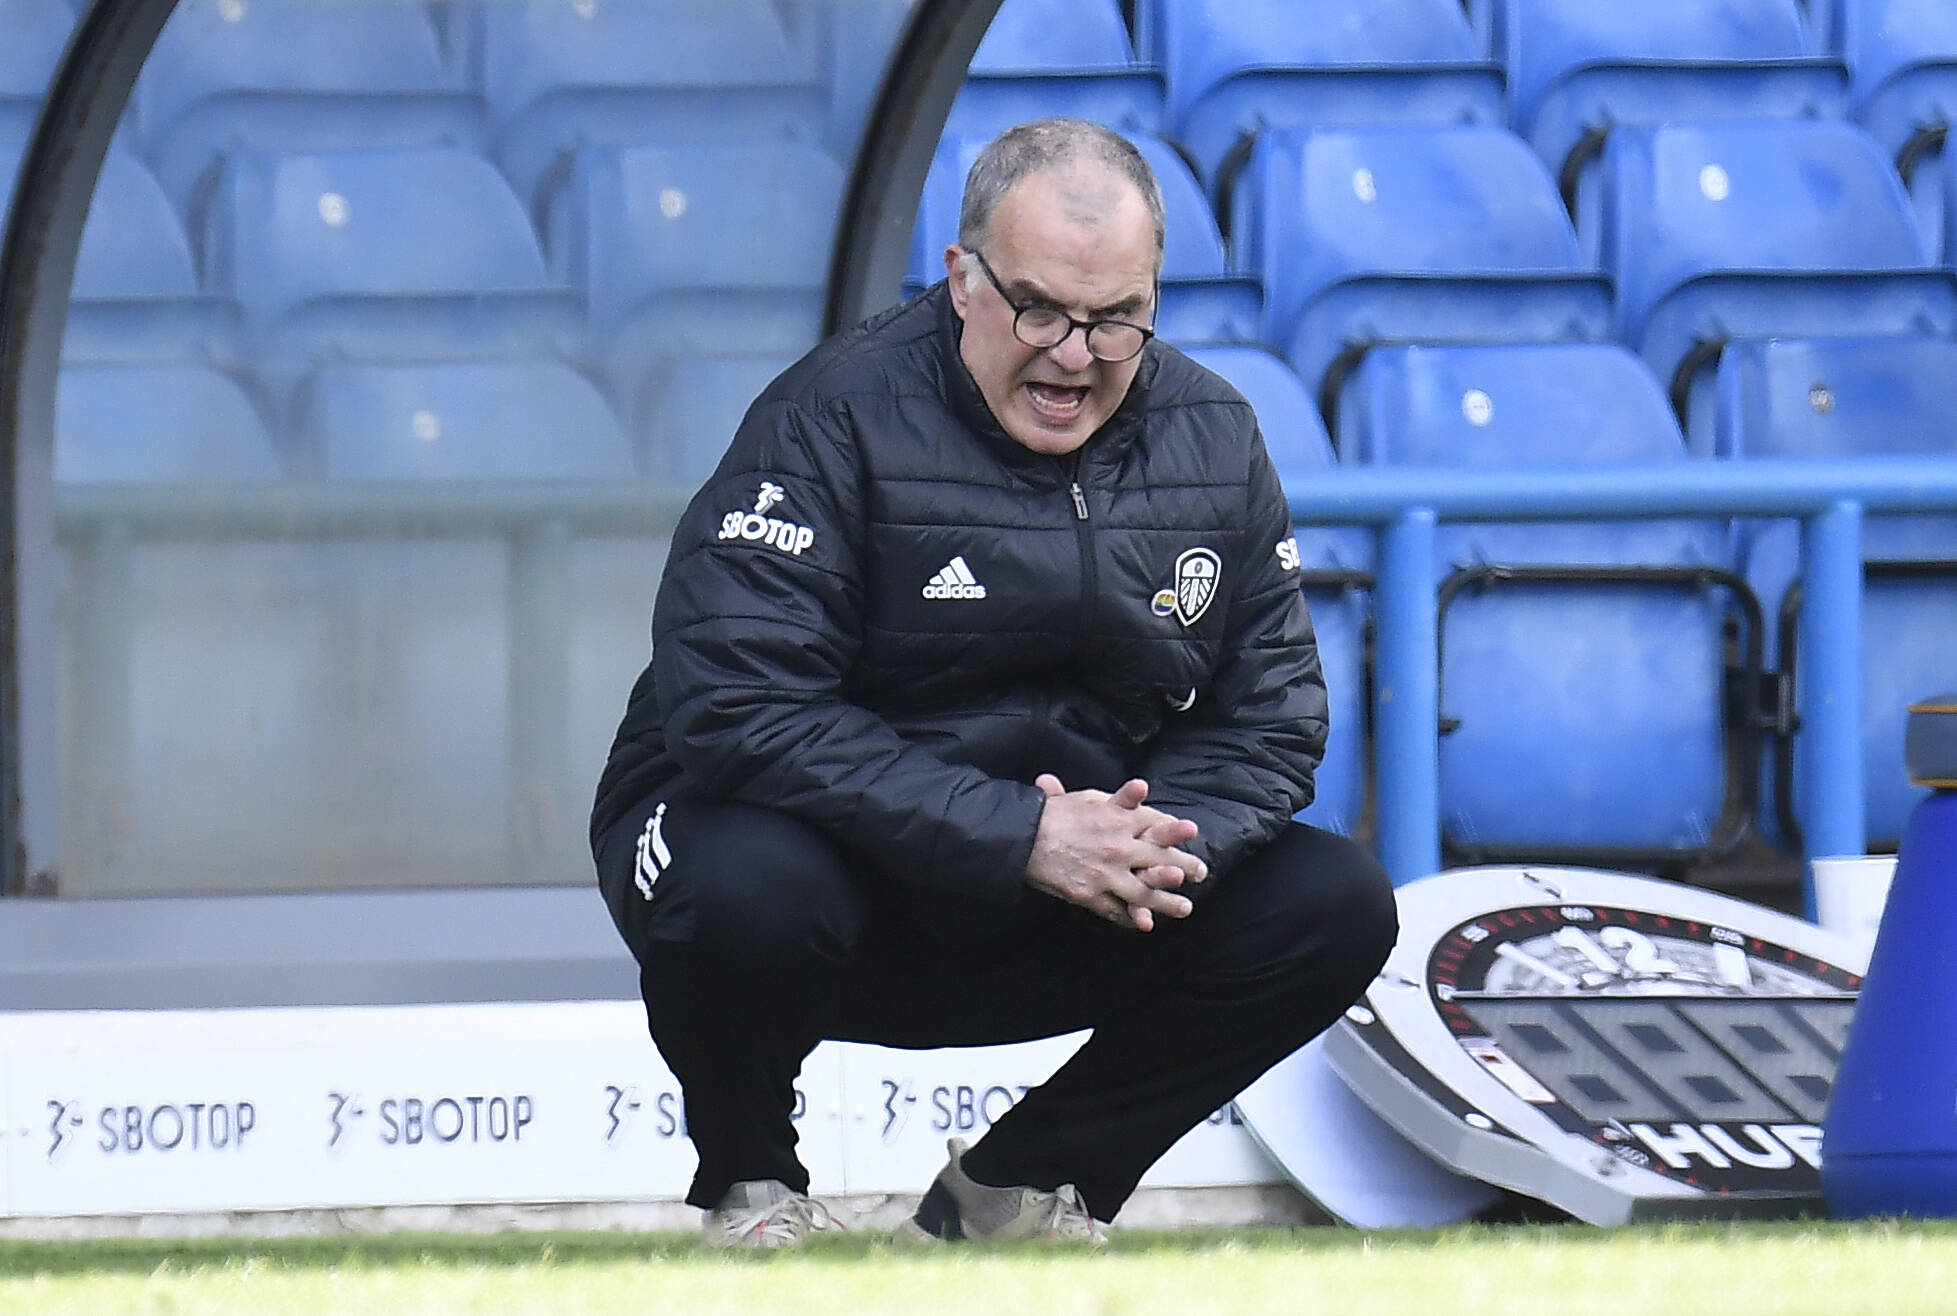 Lewis O’Brien eager to join Leeds United (Marcelo Bielsa is seen in the photo)